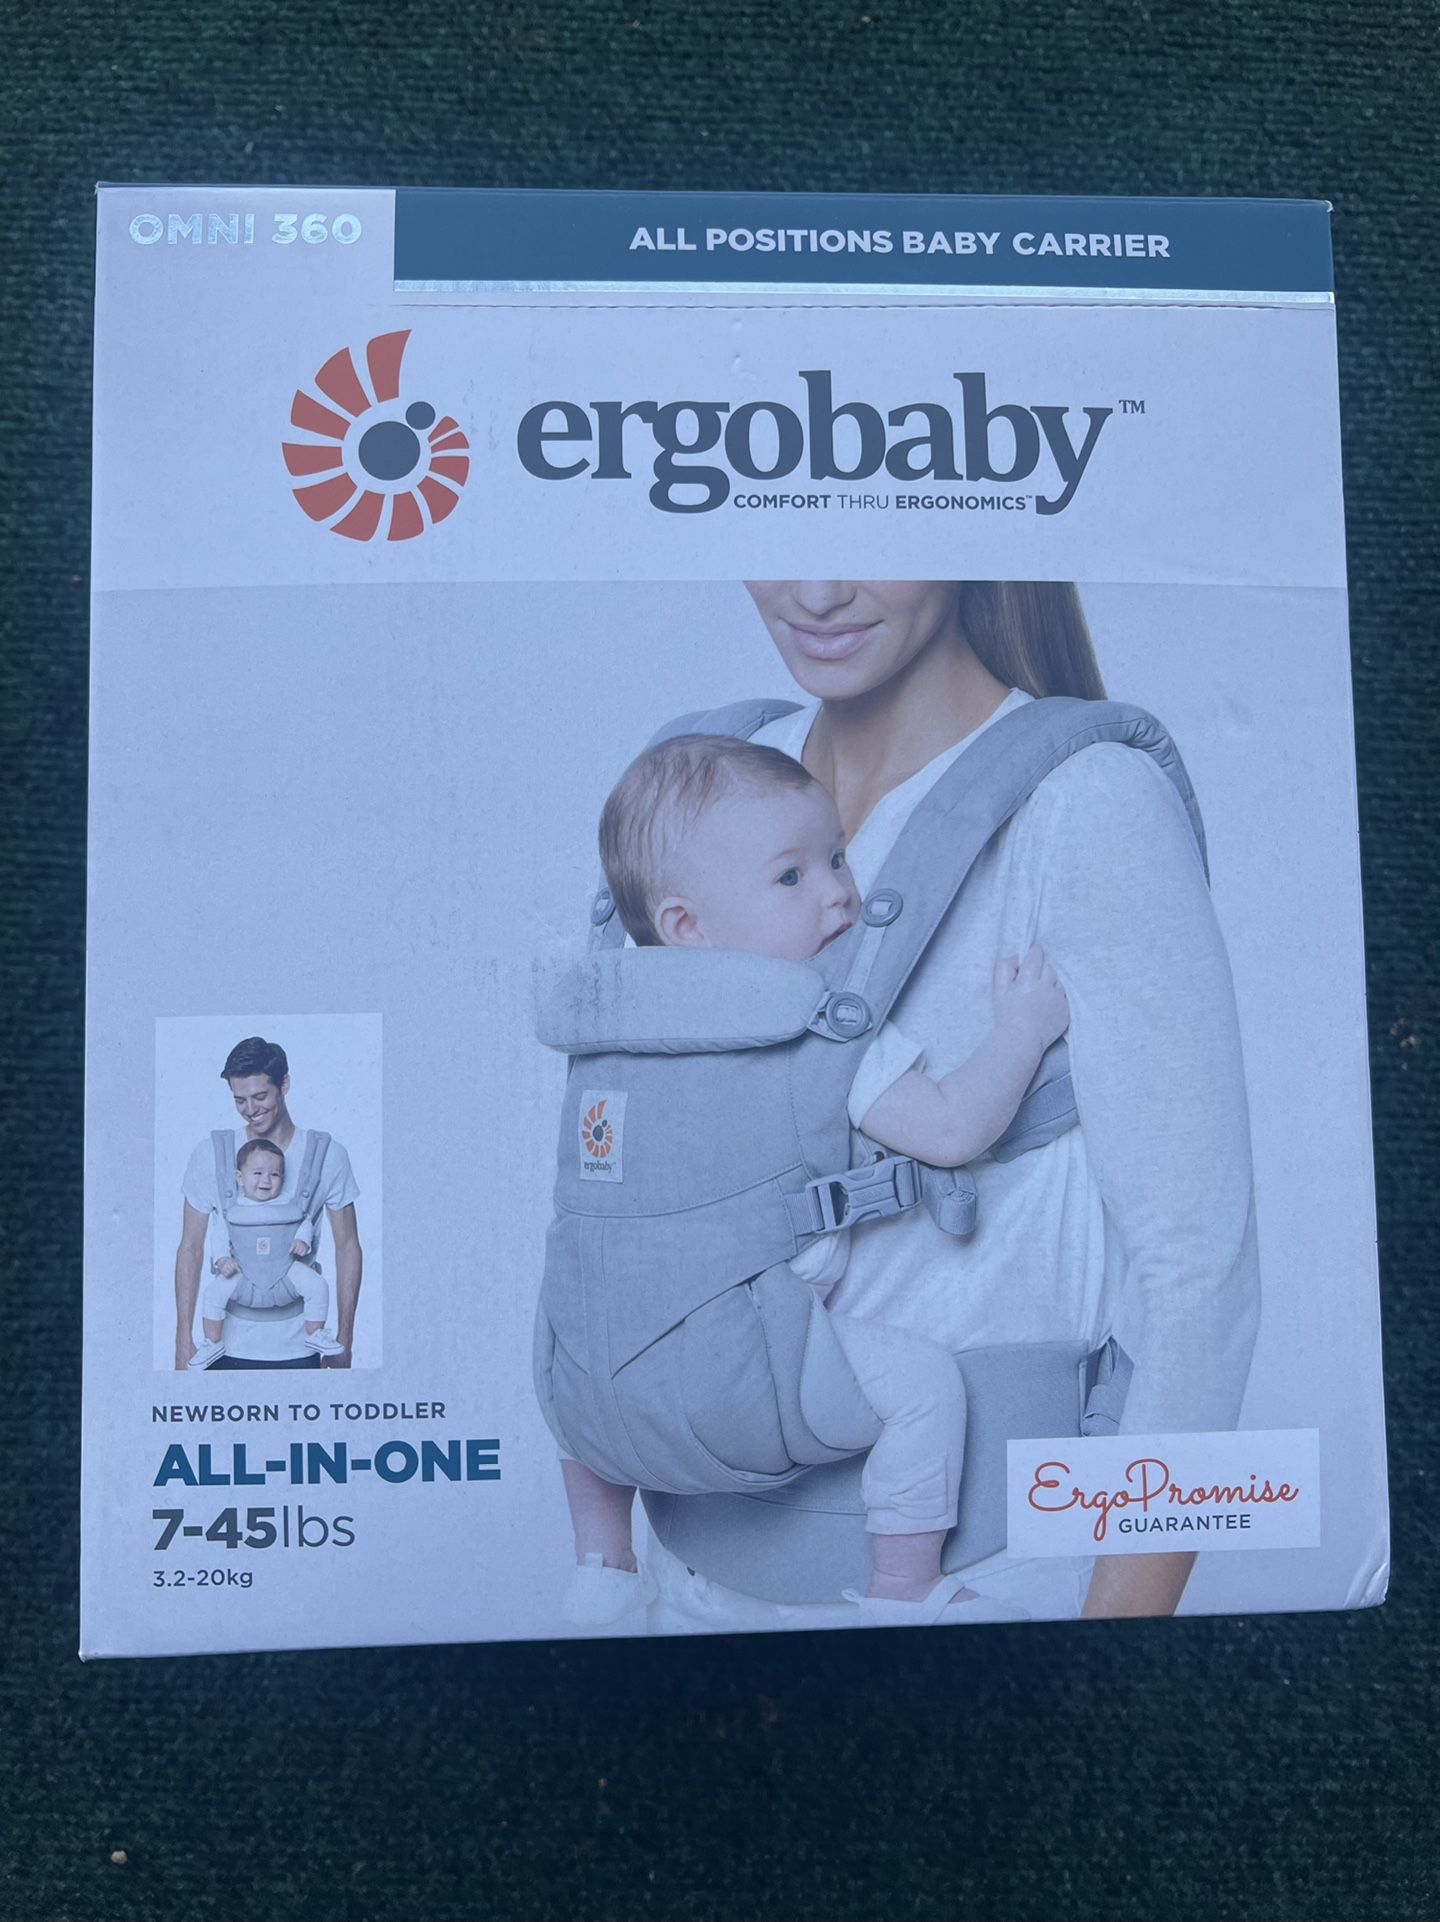 All-position Baby Carrier For Newborn To Toddler 